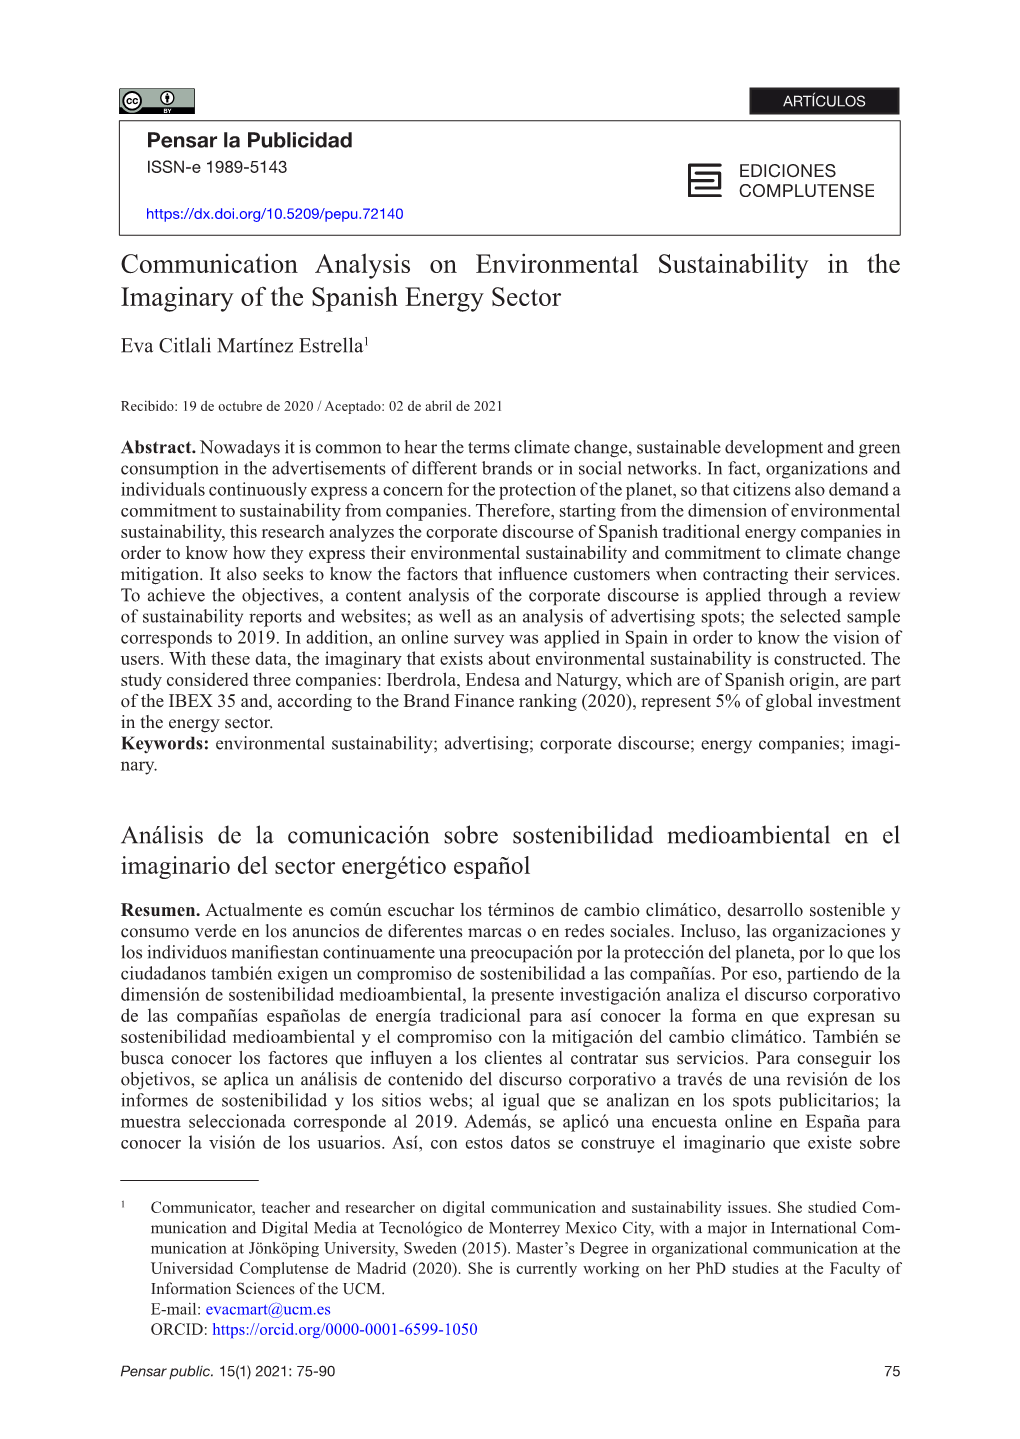 Communication Analysis on Environmental Sustainability in the Imaginary of the Spanish Energy Sector